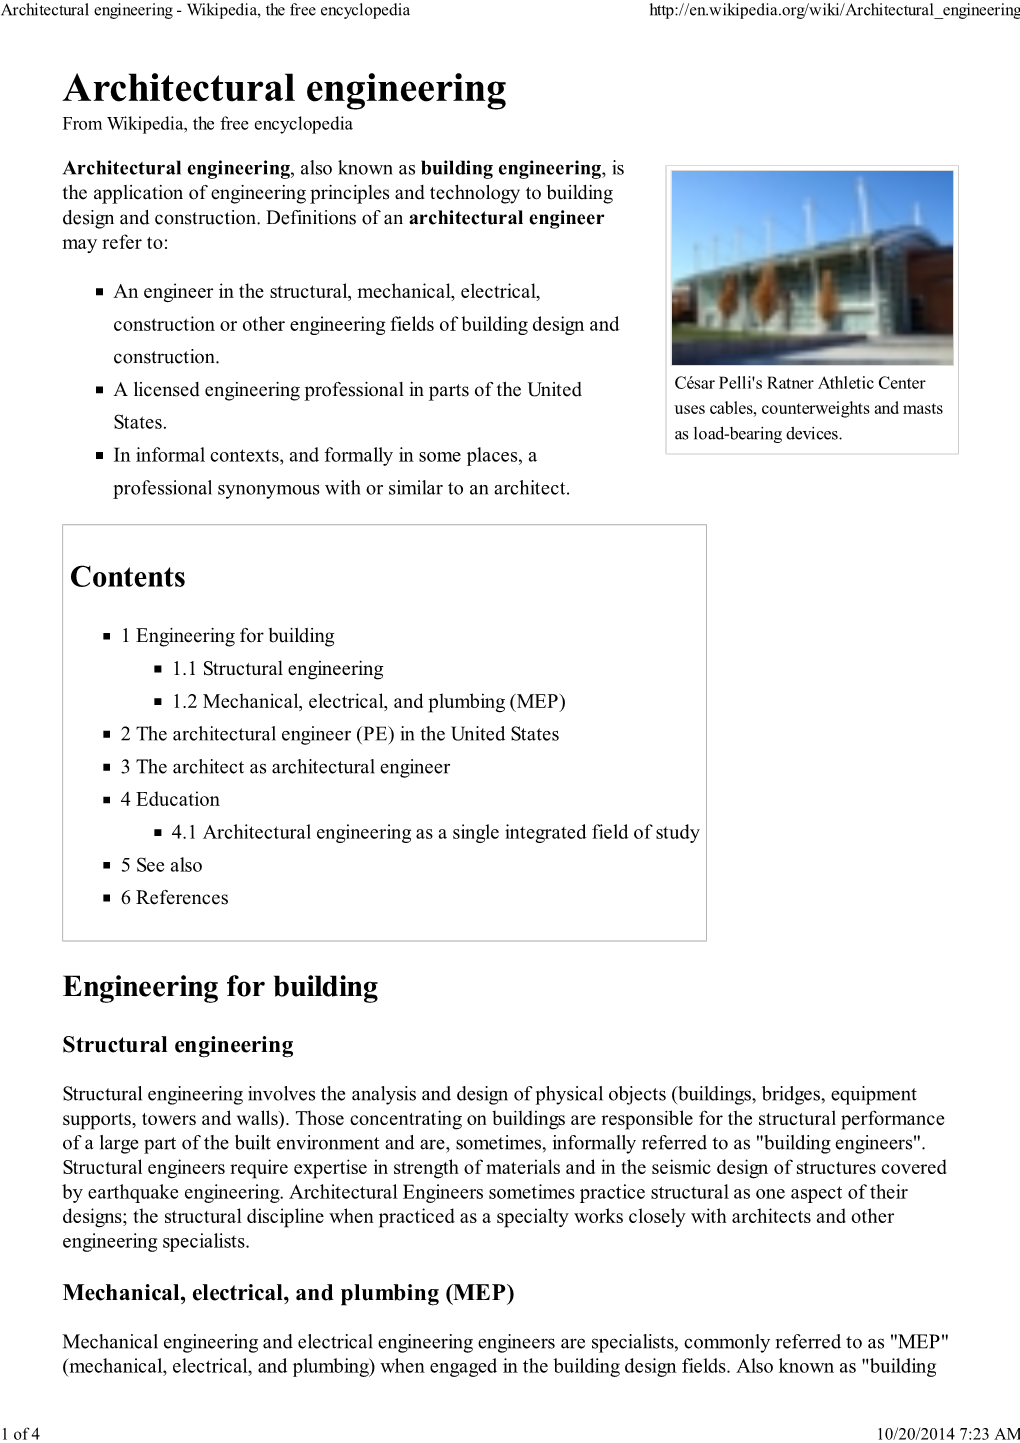 Architectural Engineering - Wikipedia, the Free Encyclopedia